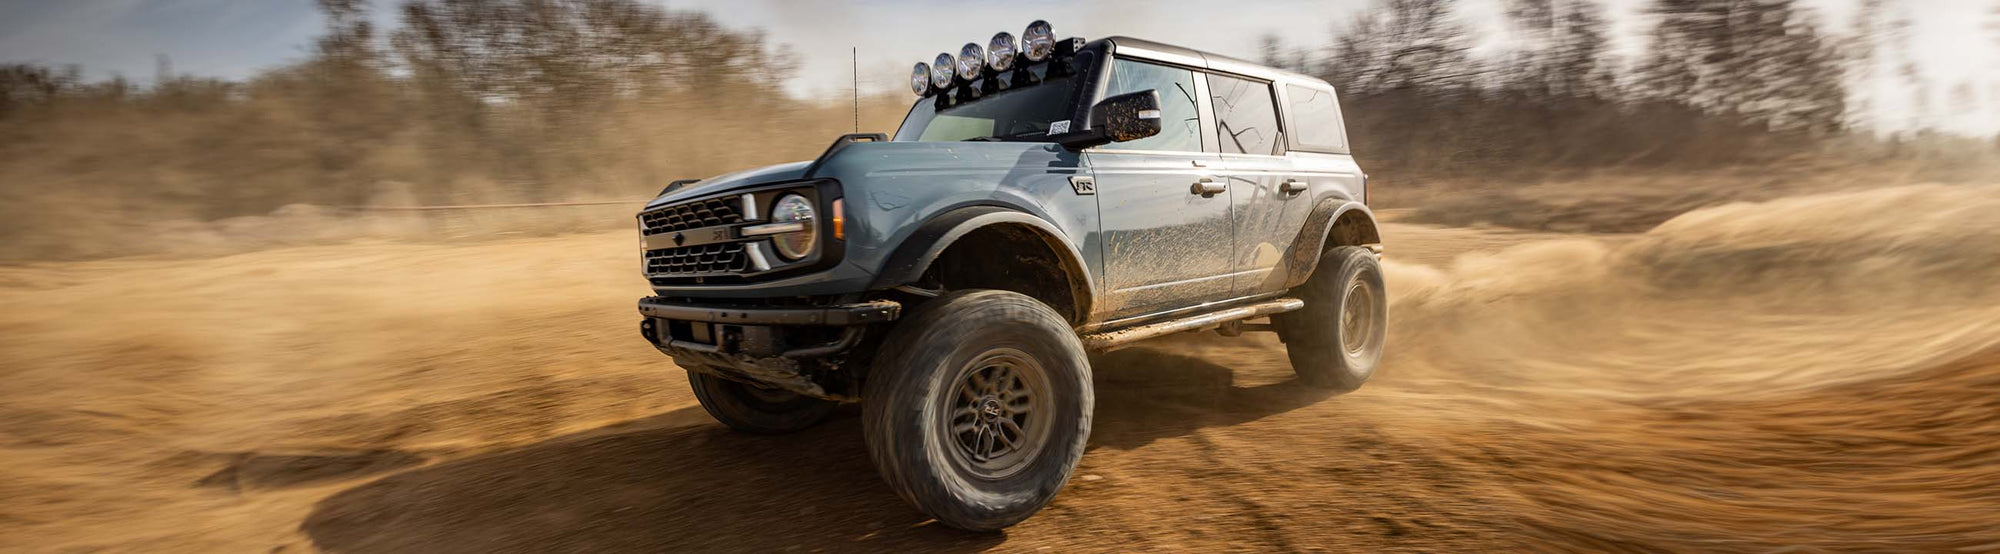 Bronco RTR on offroad trail